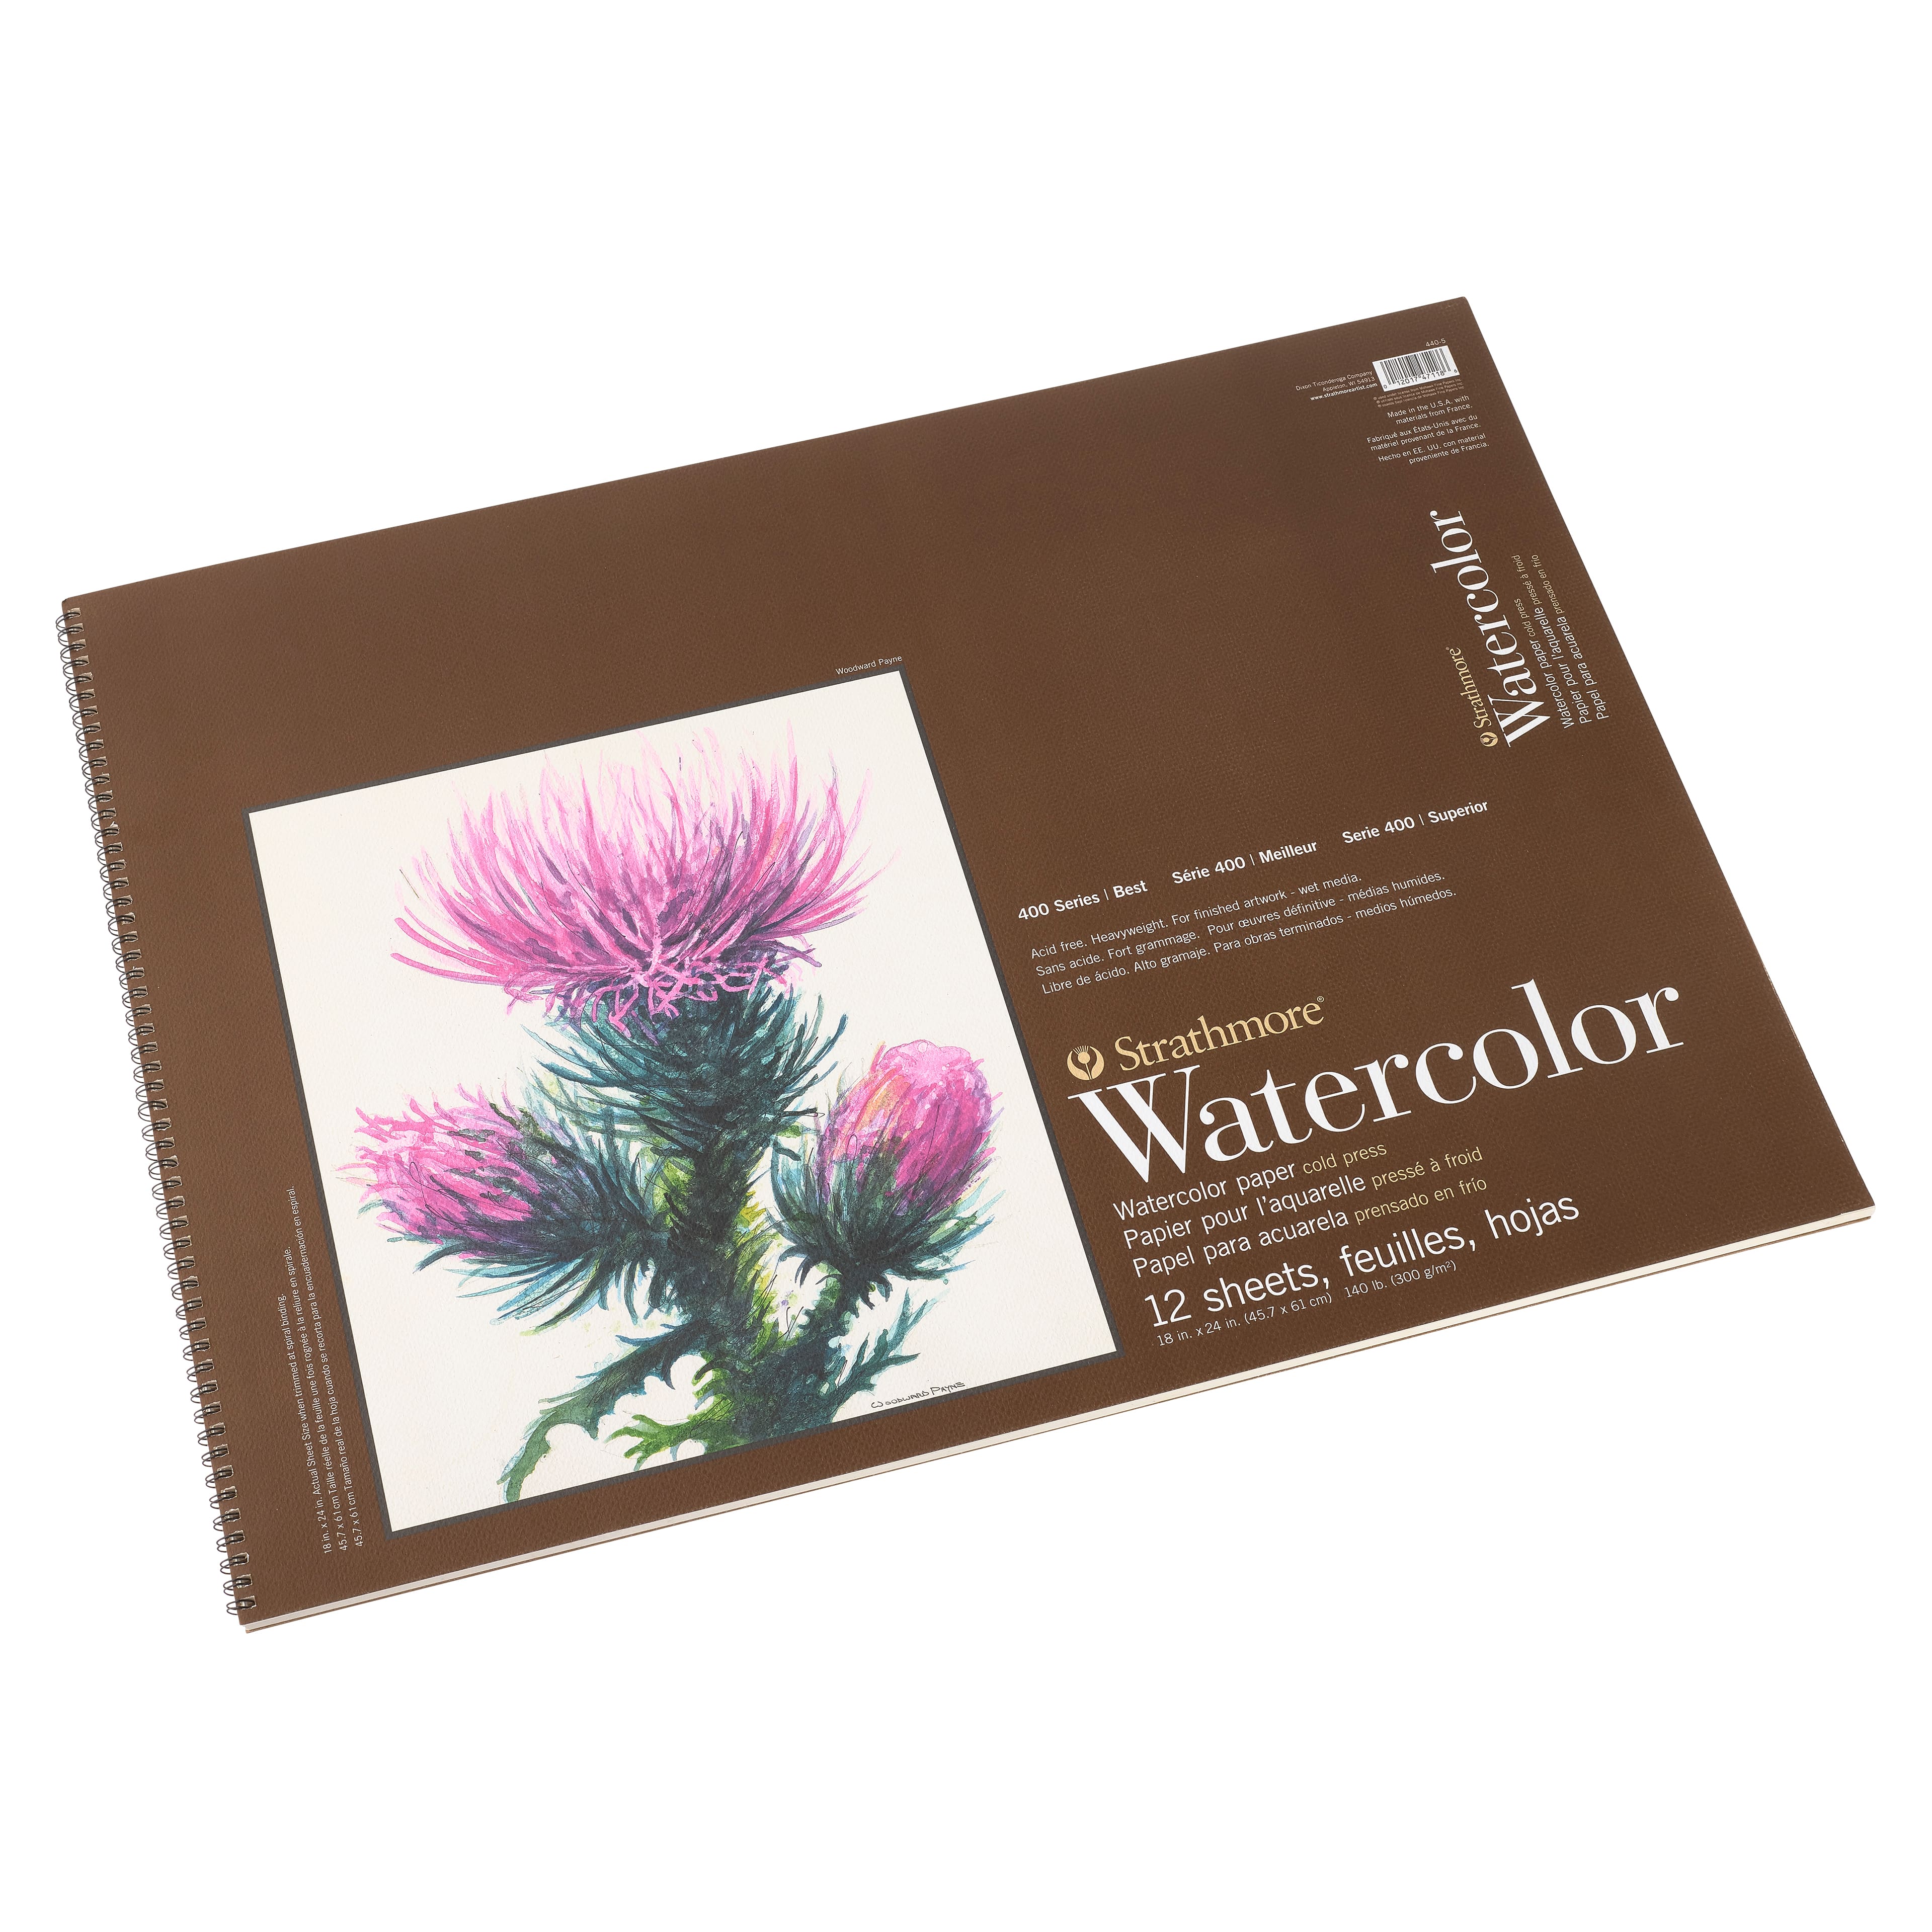 Strathmore Watercolor Paper Pad, 200 Series, 9 x 12, Tape Bound